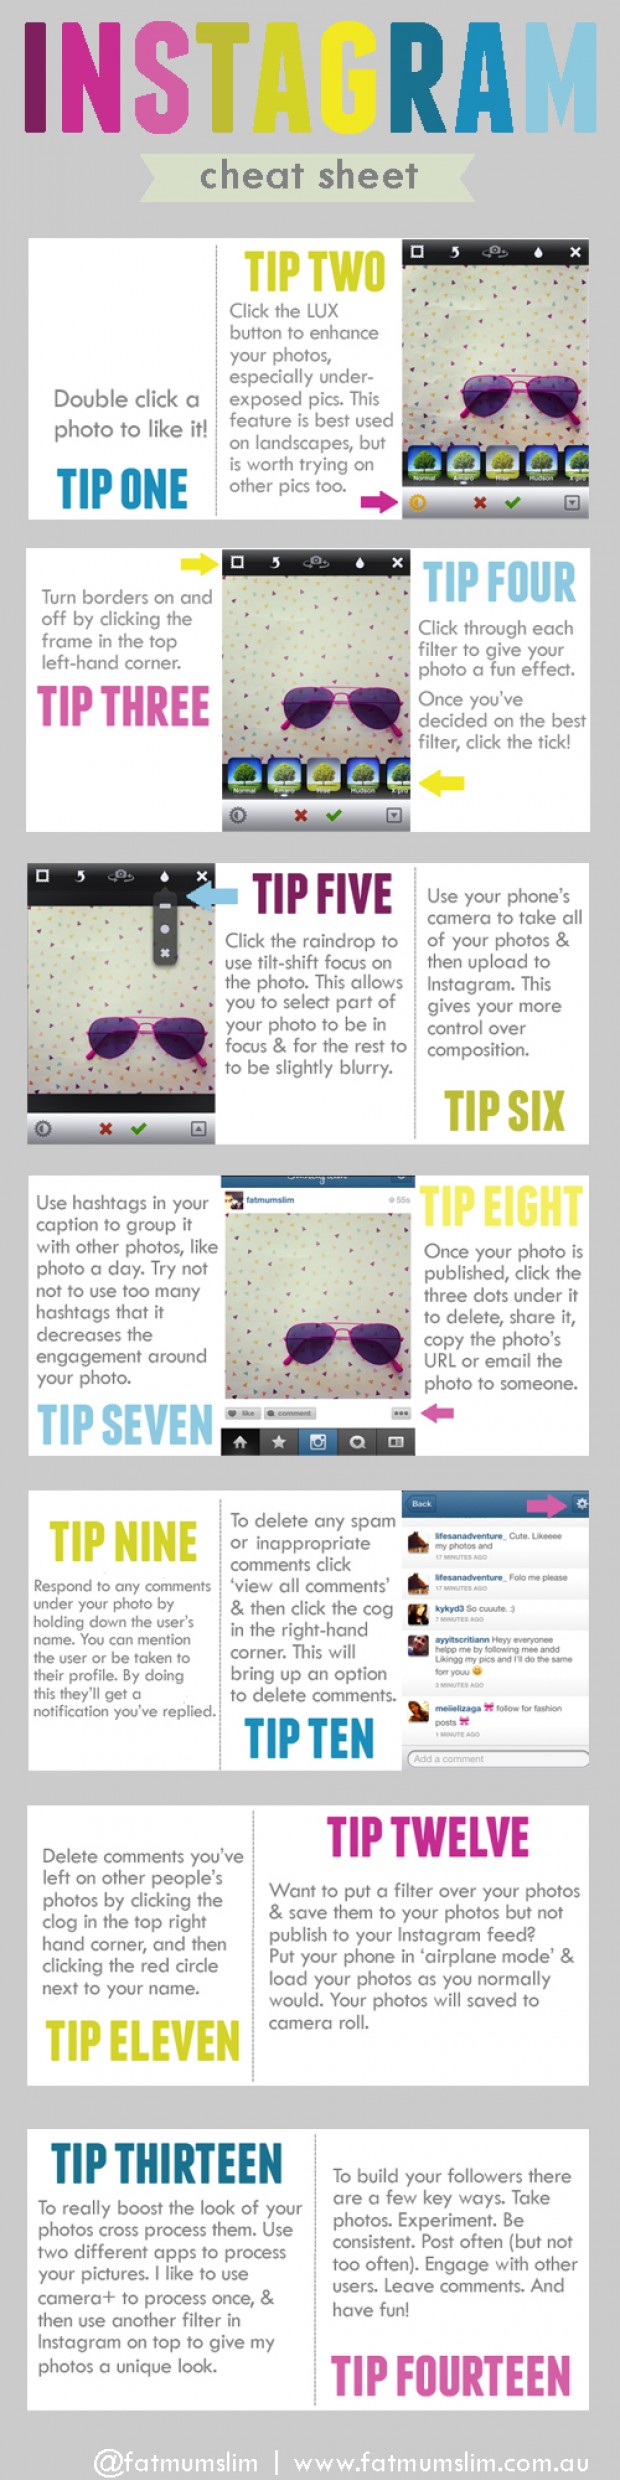 14 Great Instagram Tips and Tricks